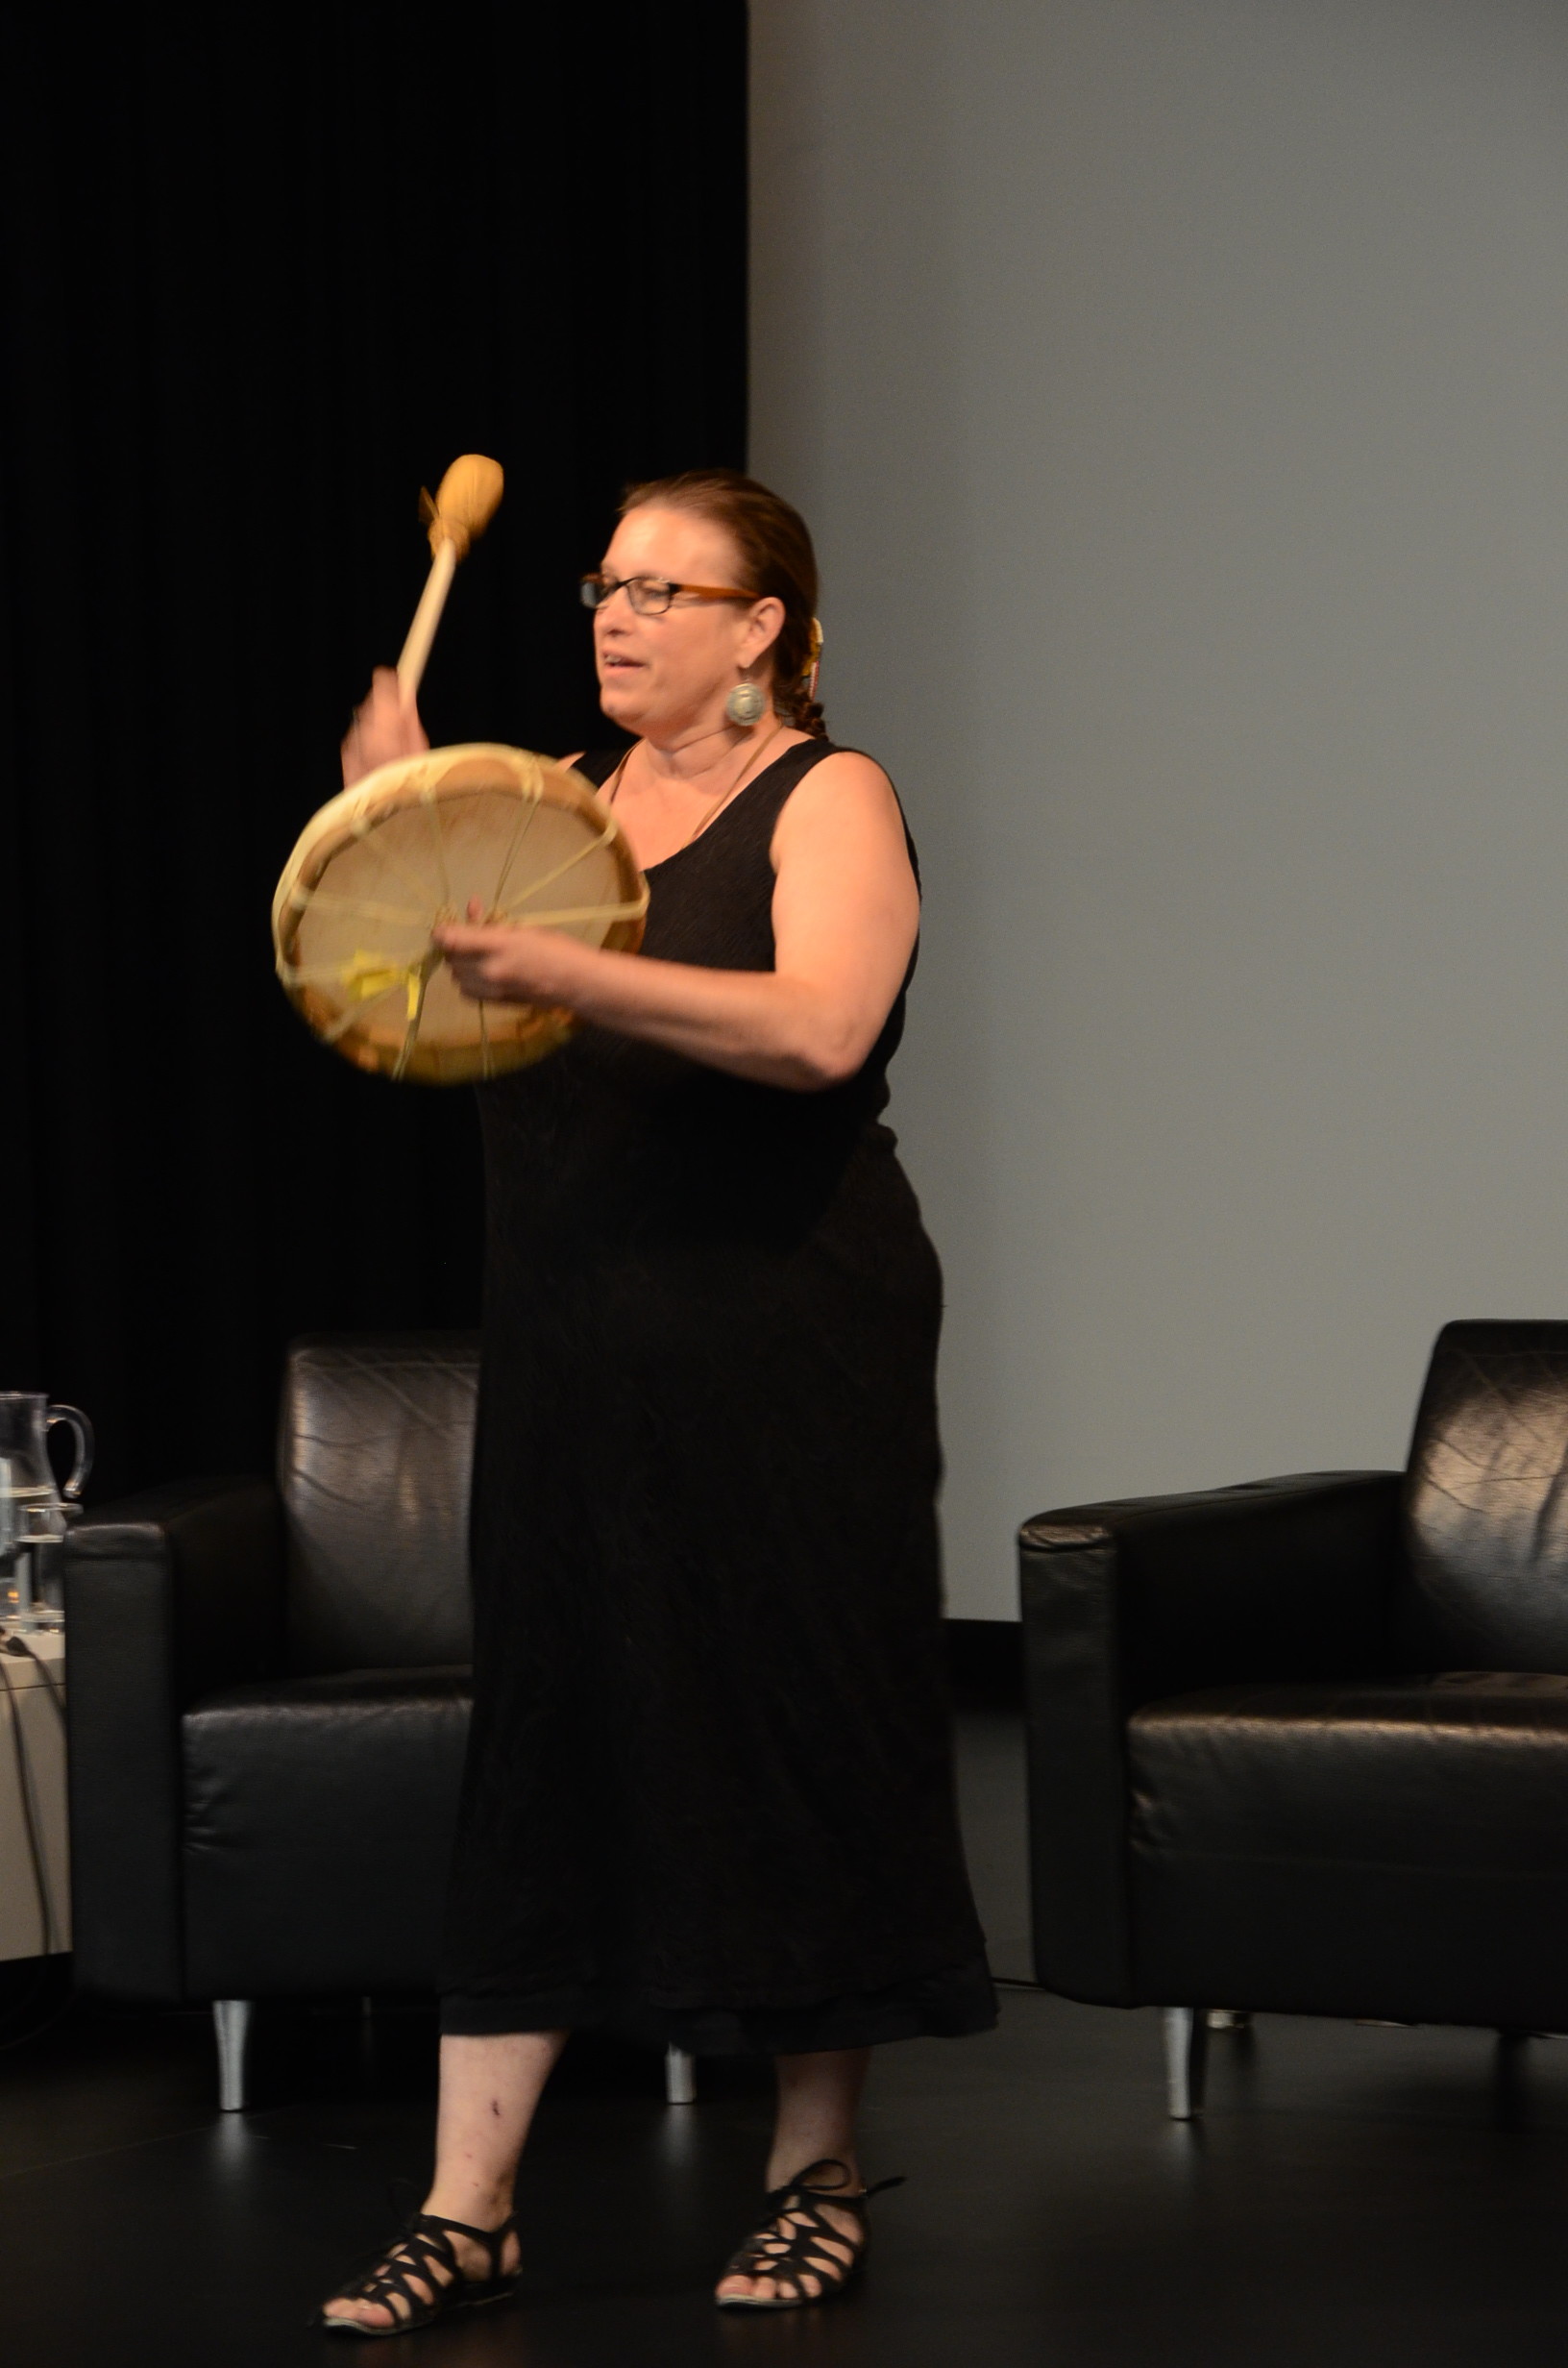 Photo: Aboriginal drummer Heather Majuary closed the event with drumming in honour of incarcerated Aboriginal lands.